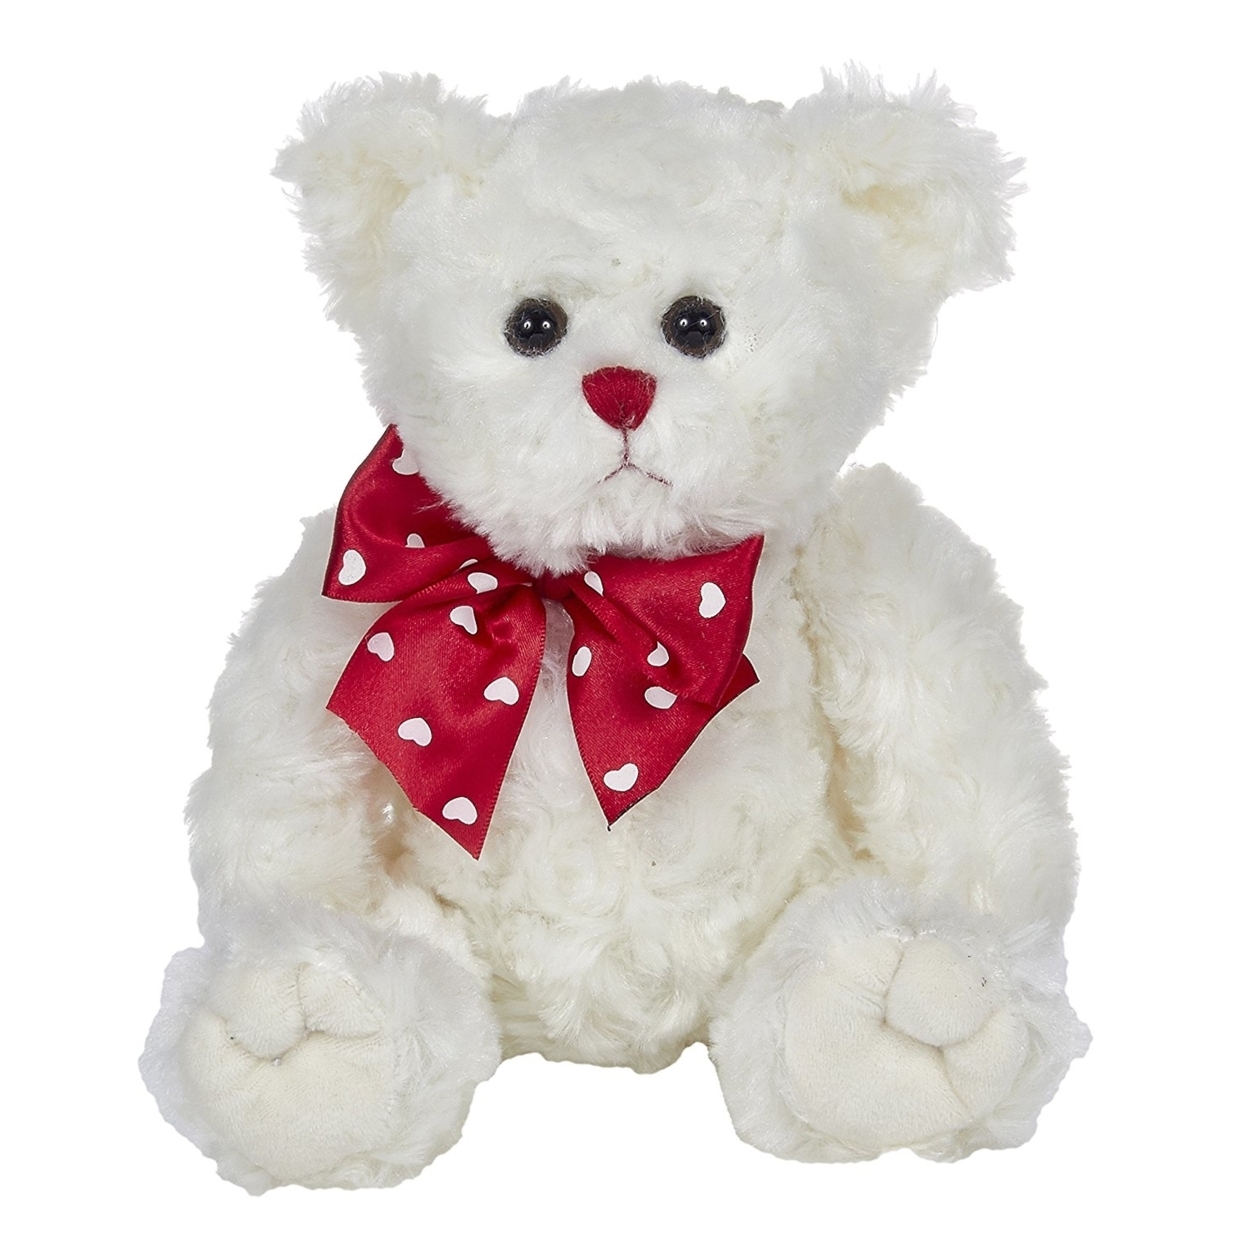 Bearington Lil' Lovable Valentine's Day 11 Plush Stuffed Animal Teddy Bear White , Rose Gold And Chrome Plated Jewelry Stand